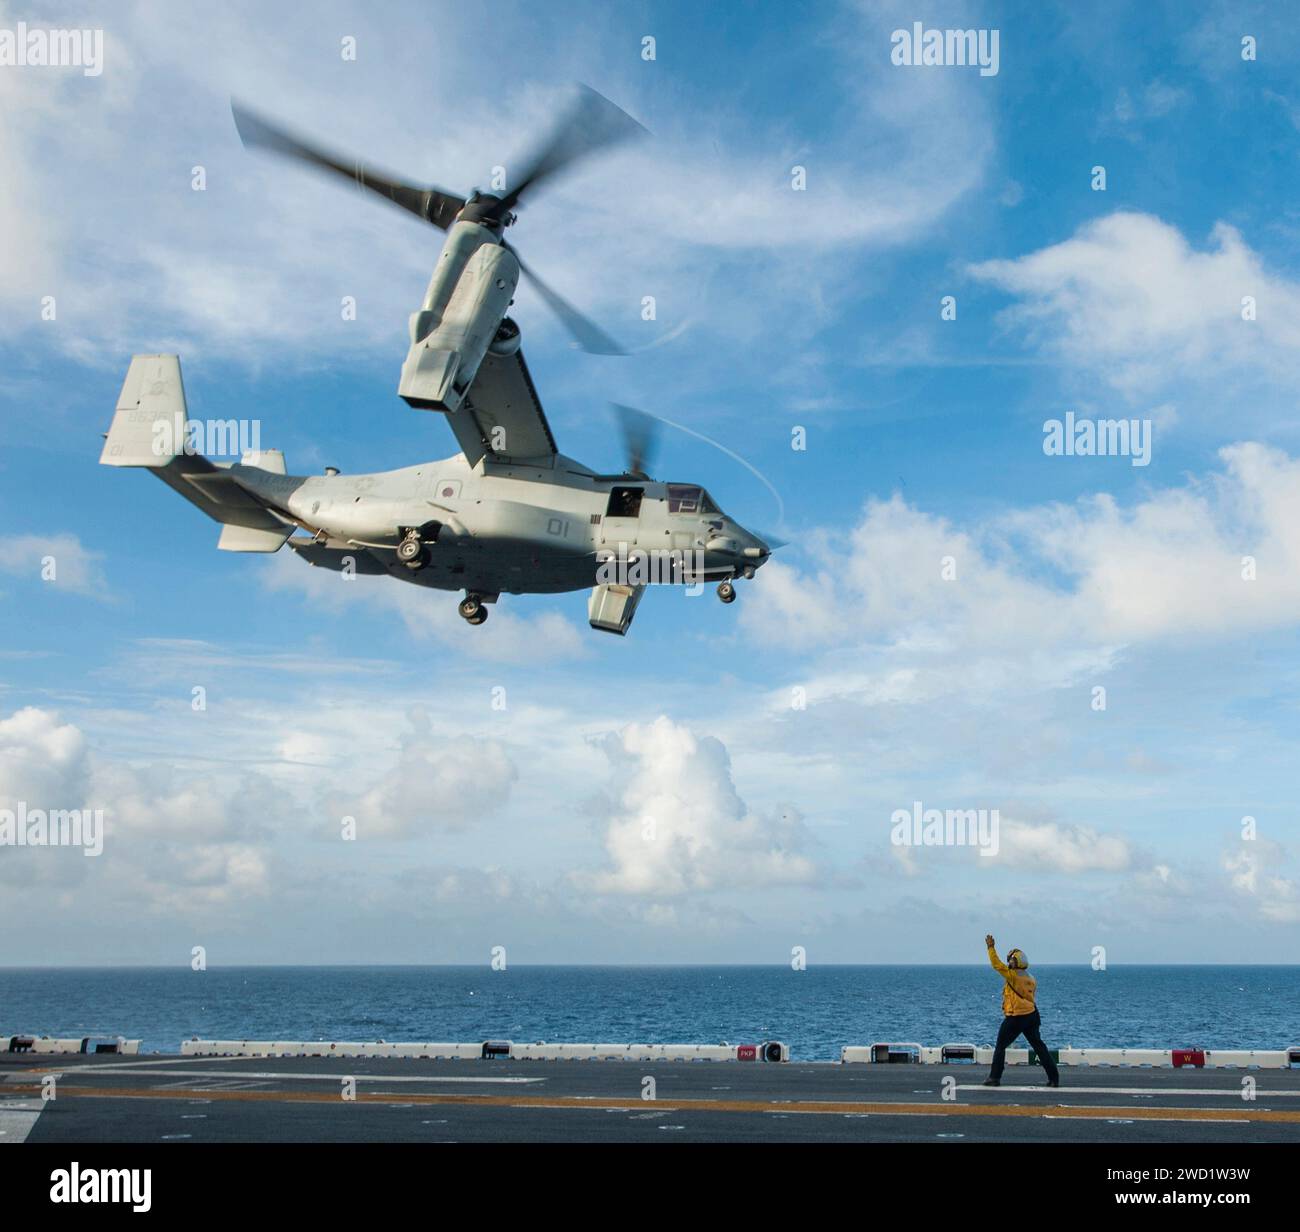 An MV-22 Osprey takes off from the flight deck of USS Wasp. Stock Photo